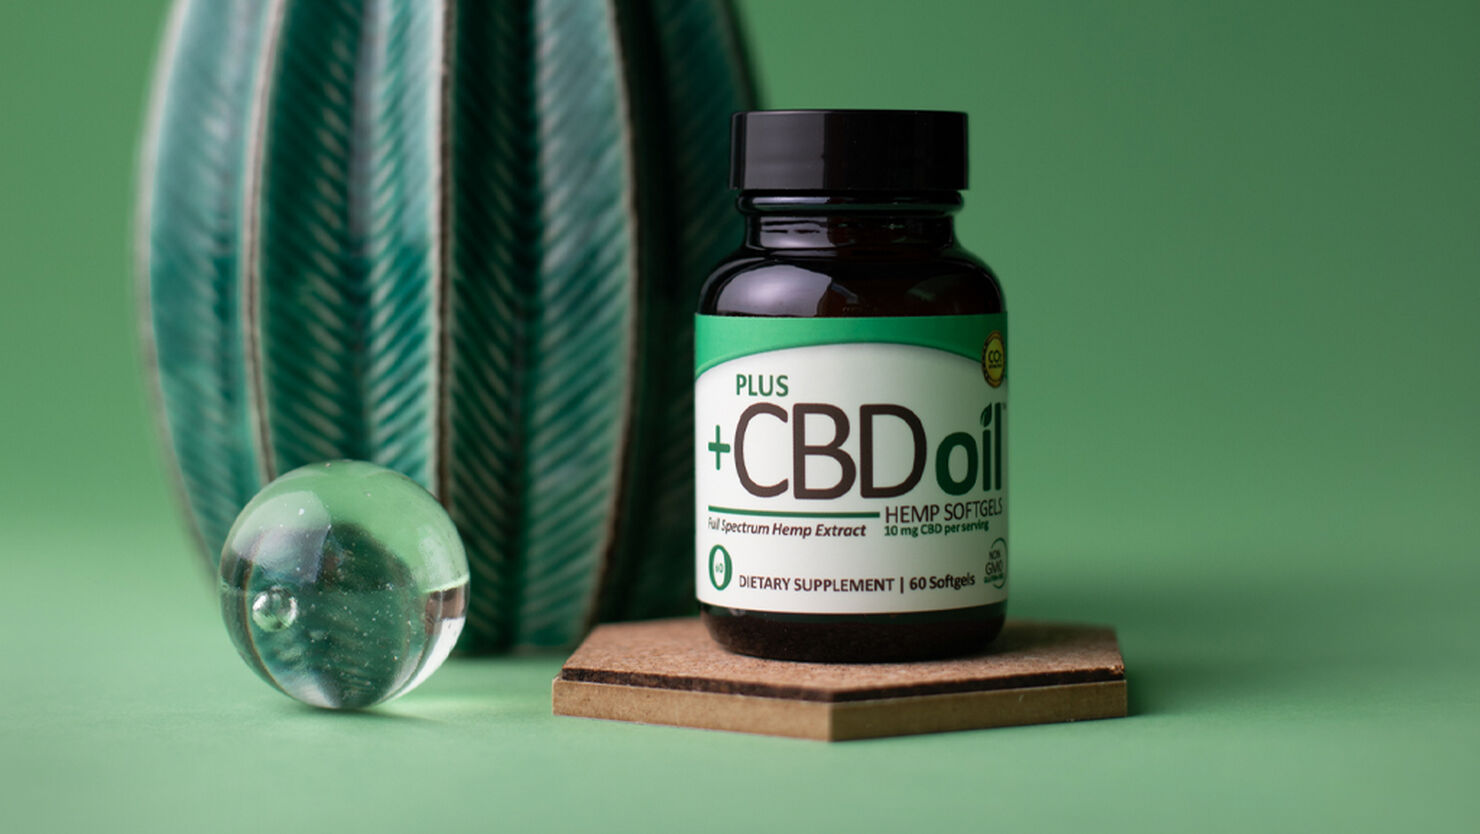 What is a CBD Supplement?